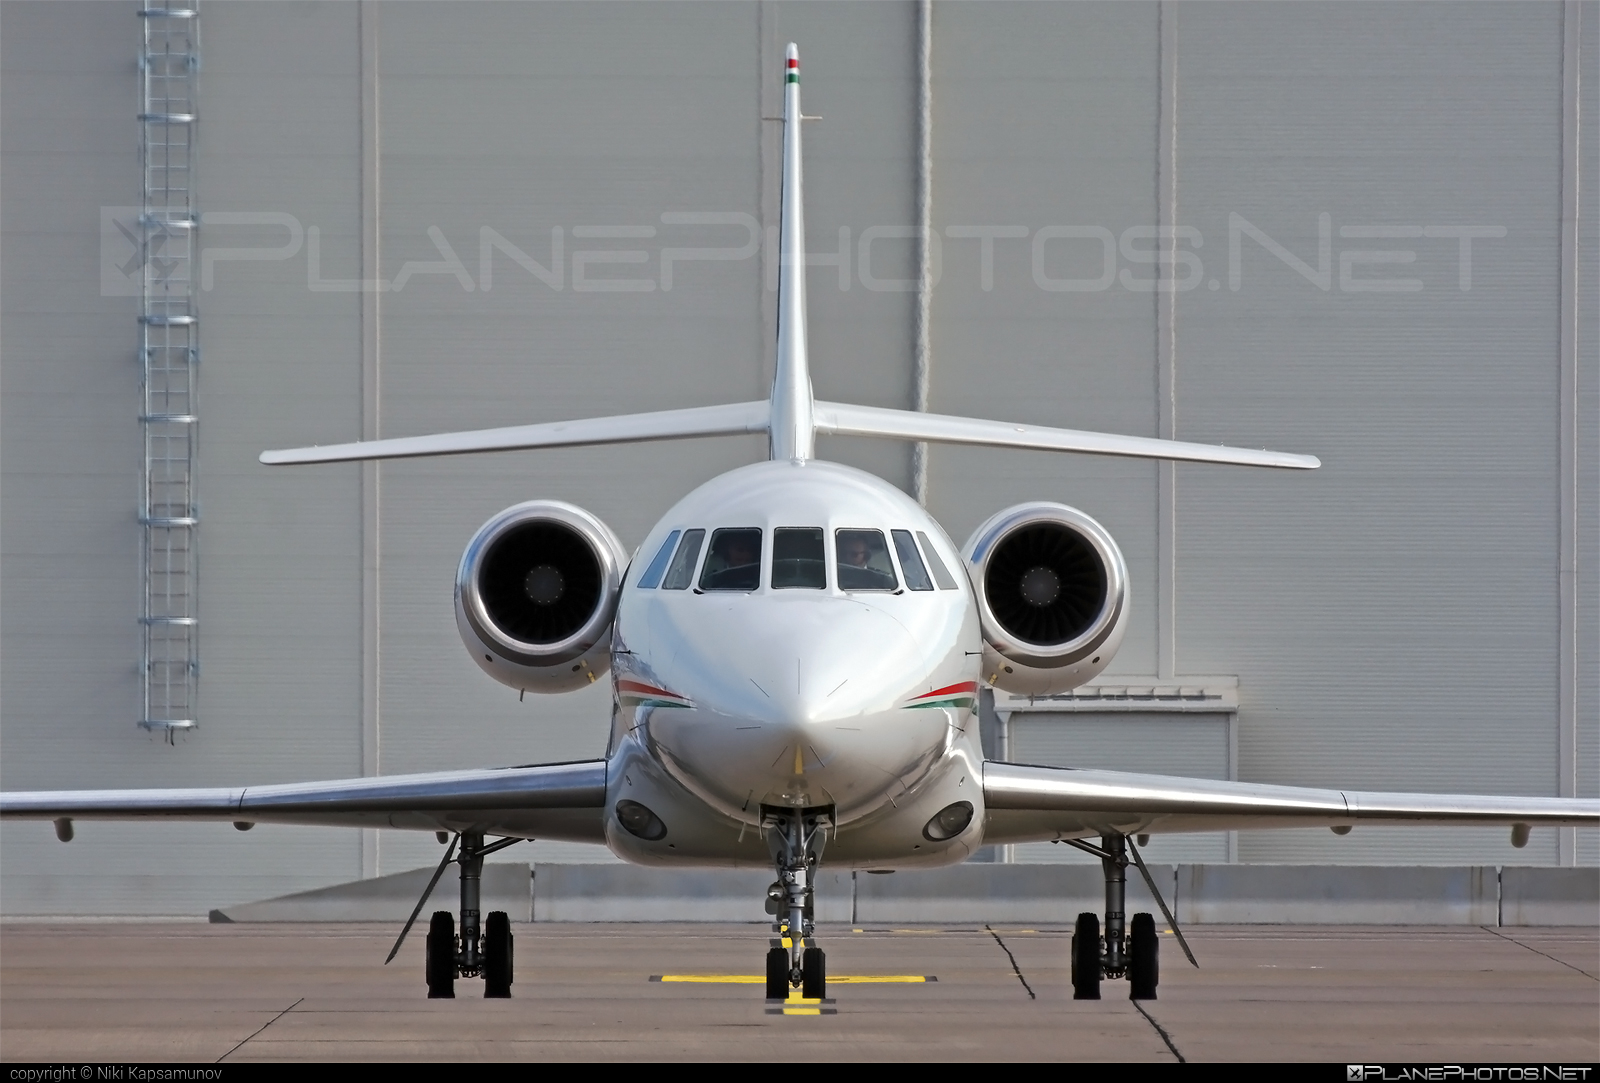 Dassault Falcon 2000S - SP-ARK operated by Private operator #dassault #dassaultfalcon #dassaultfalcon2000 #dassaultfalcon2000s #falcon2000 #falcon2000s